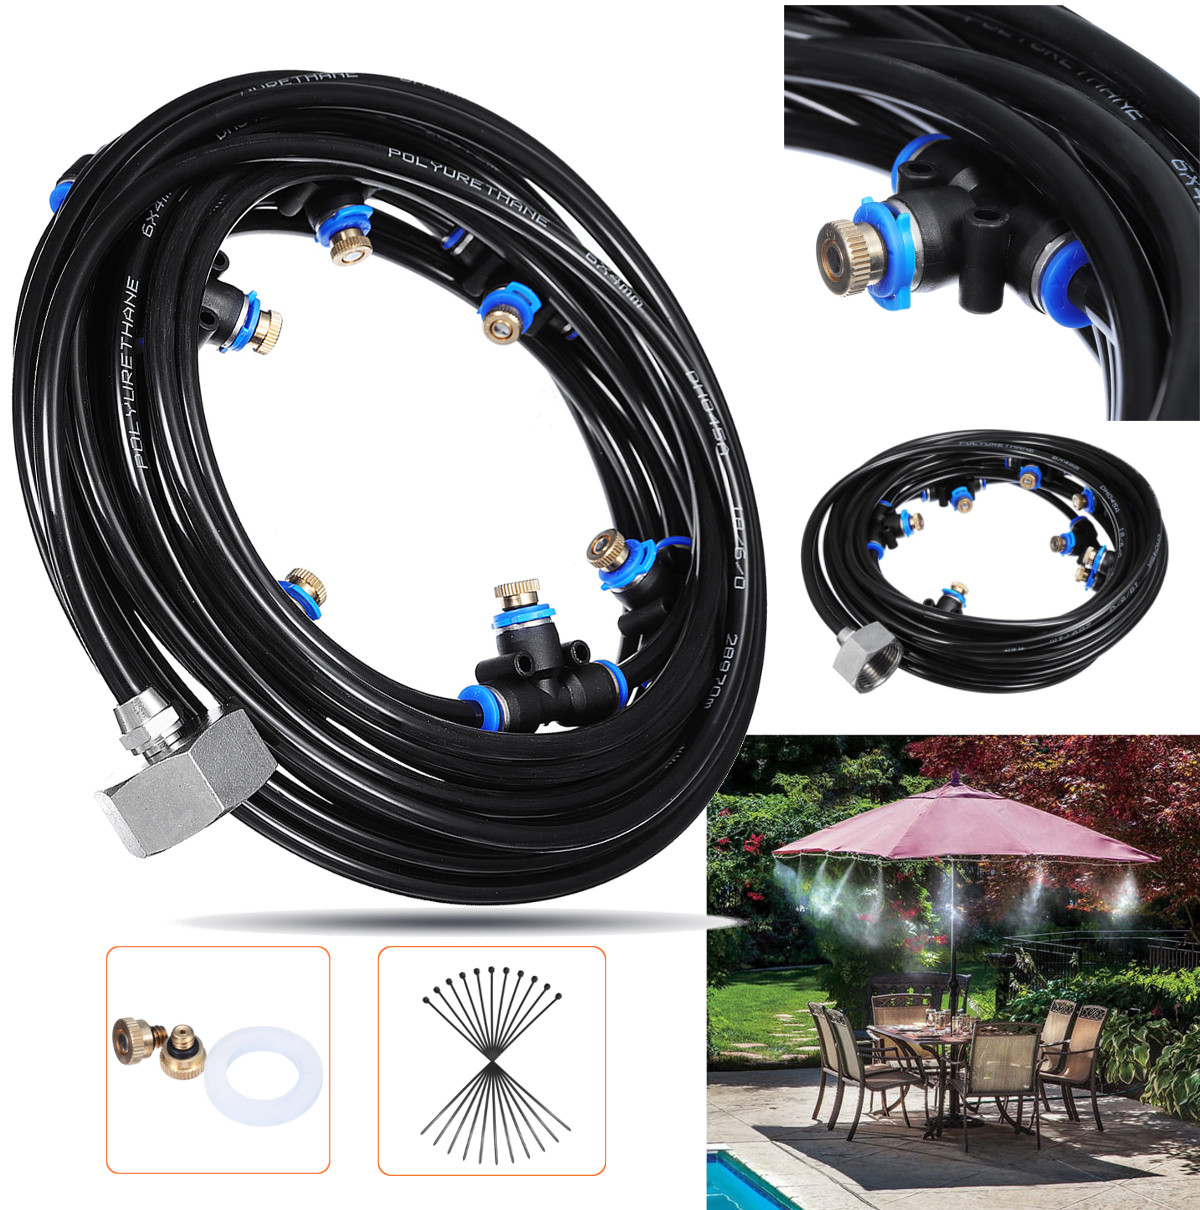 

20M+3M Outdoor Mist Coolant System Water Sprinkler Garden Patio Mister Cooling Spray Kits Micro Irrigation Set With 36 Spray Nozzles